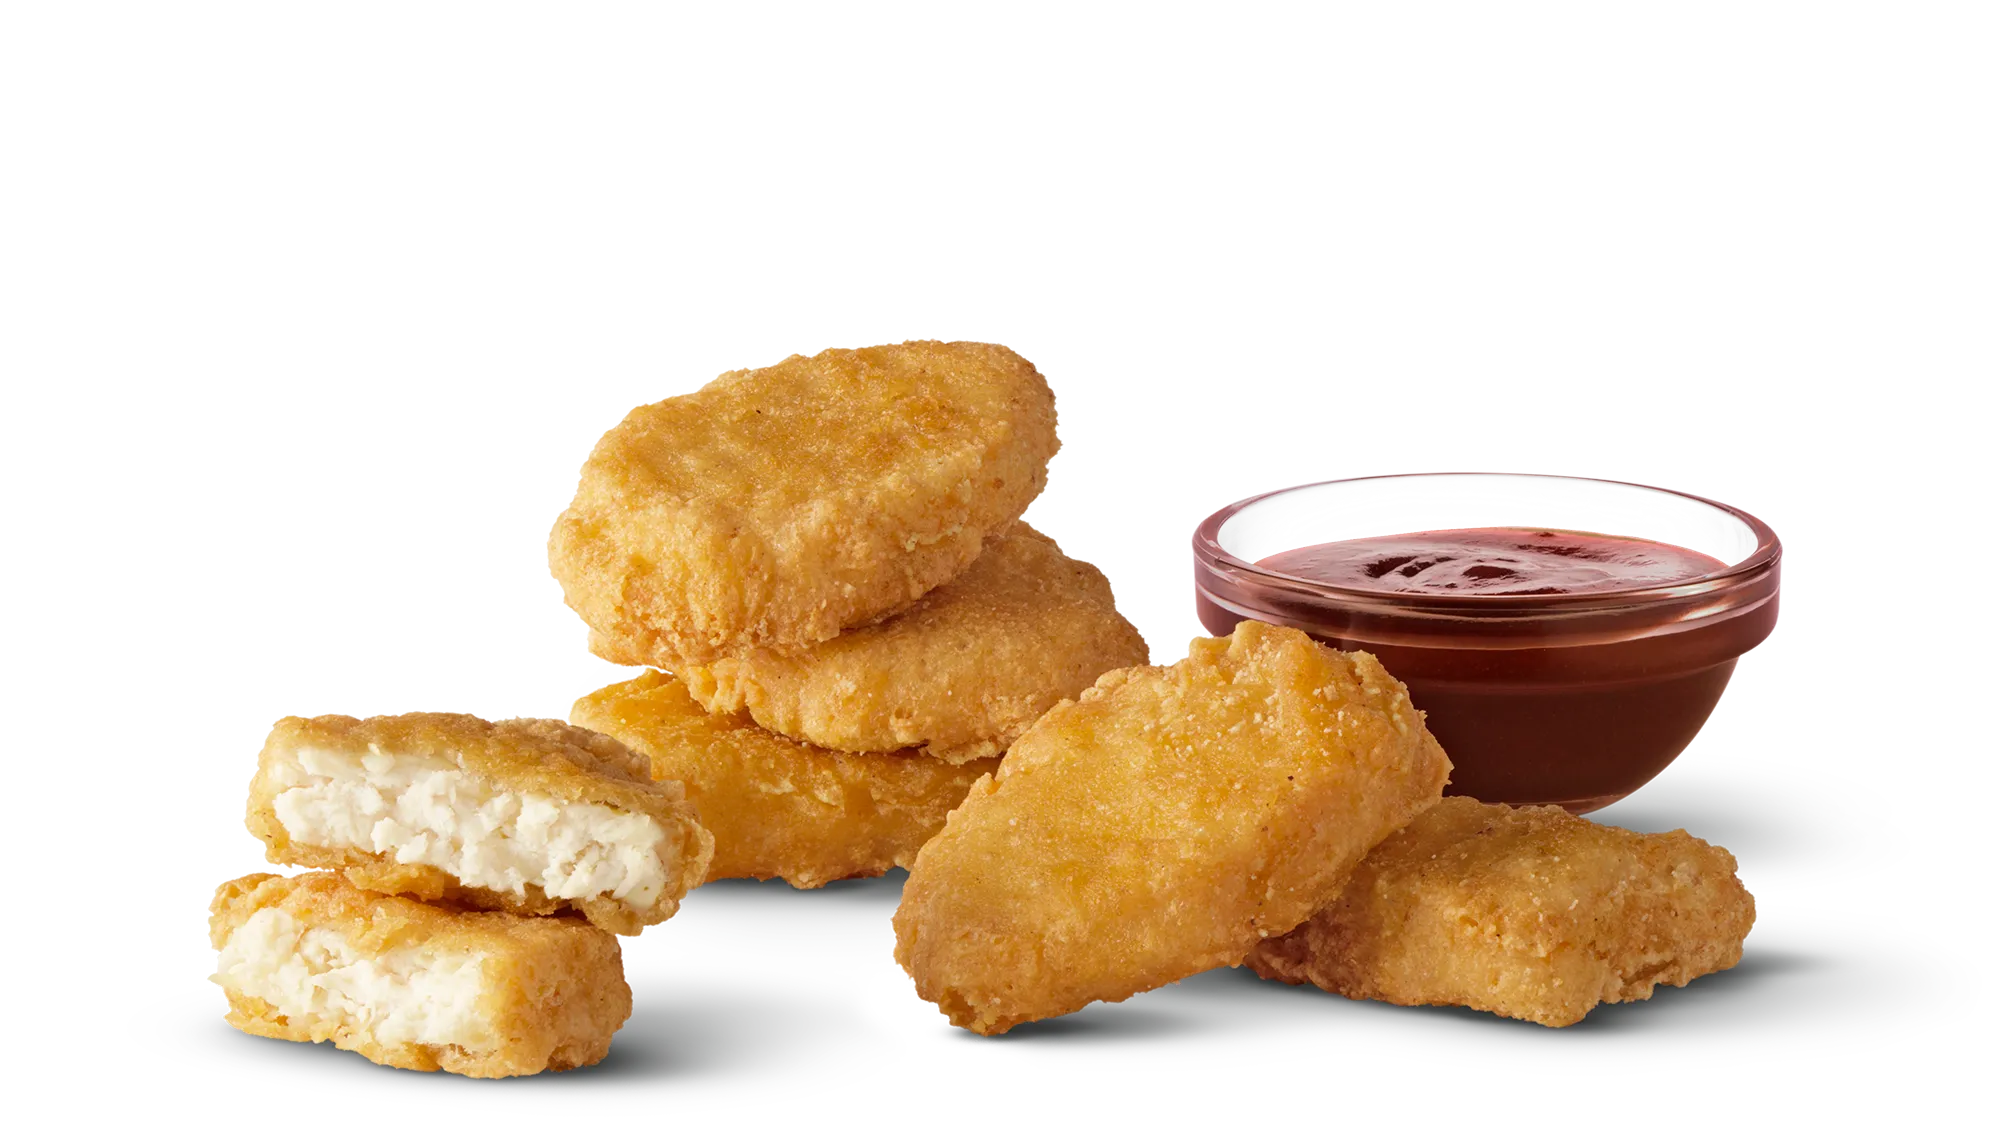 Grab Your Free McDonald's Nuggets This Wednesday: Unmissable Summer Deal Alert!